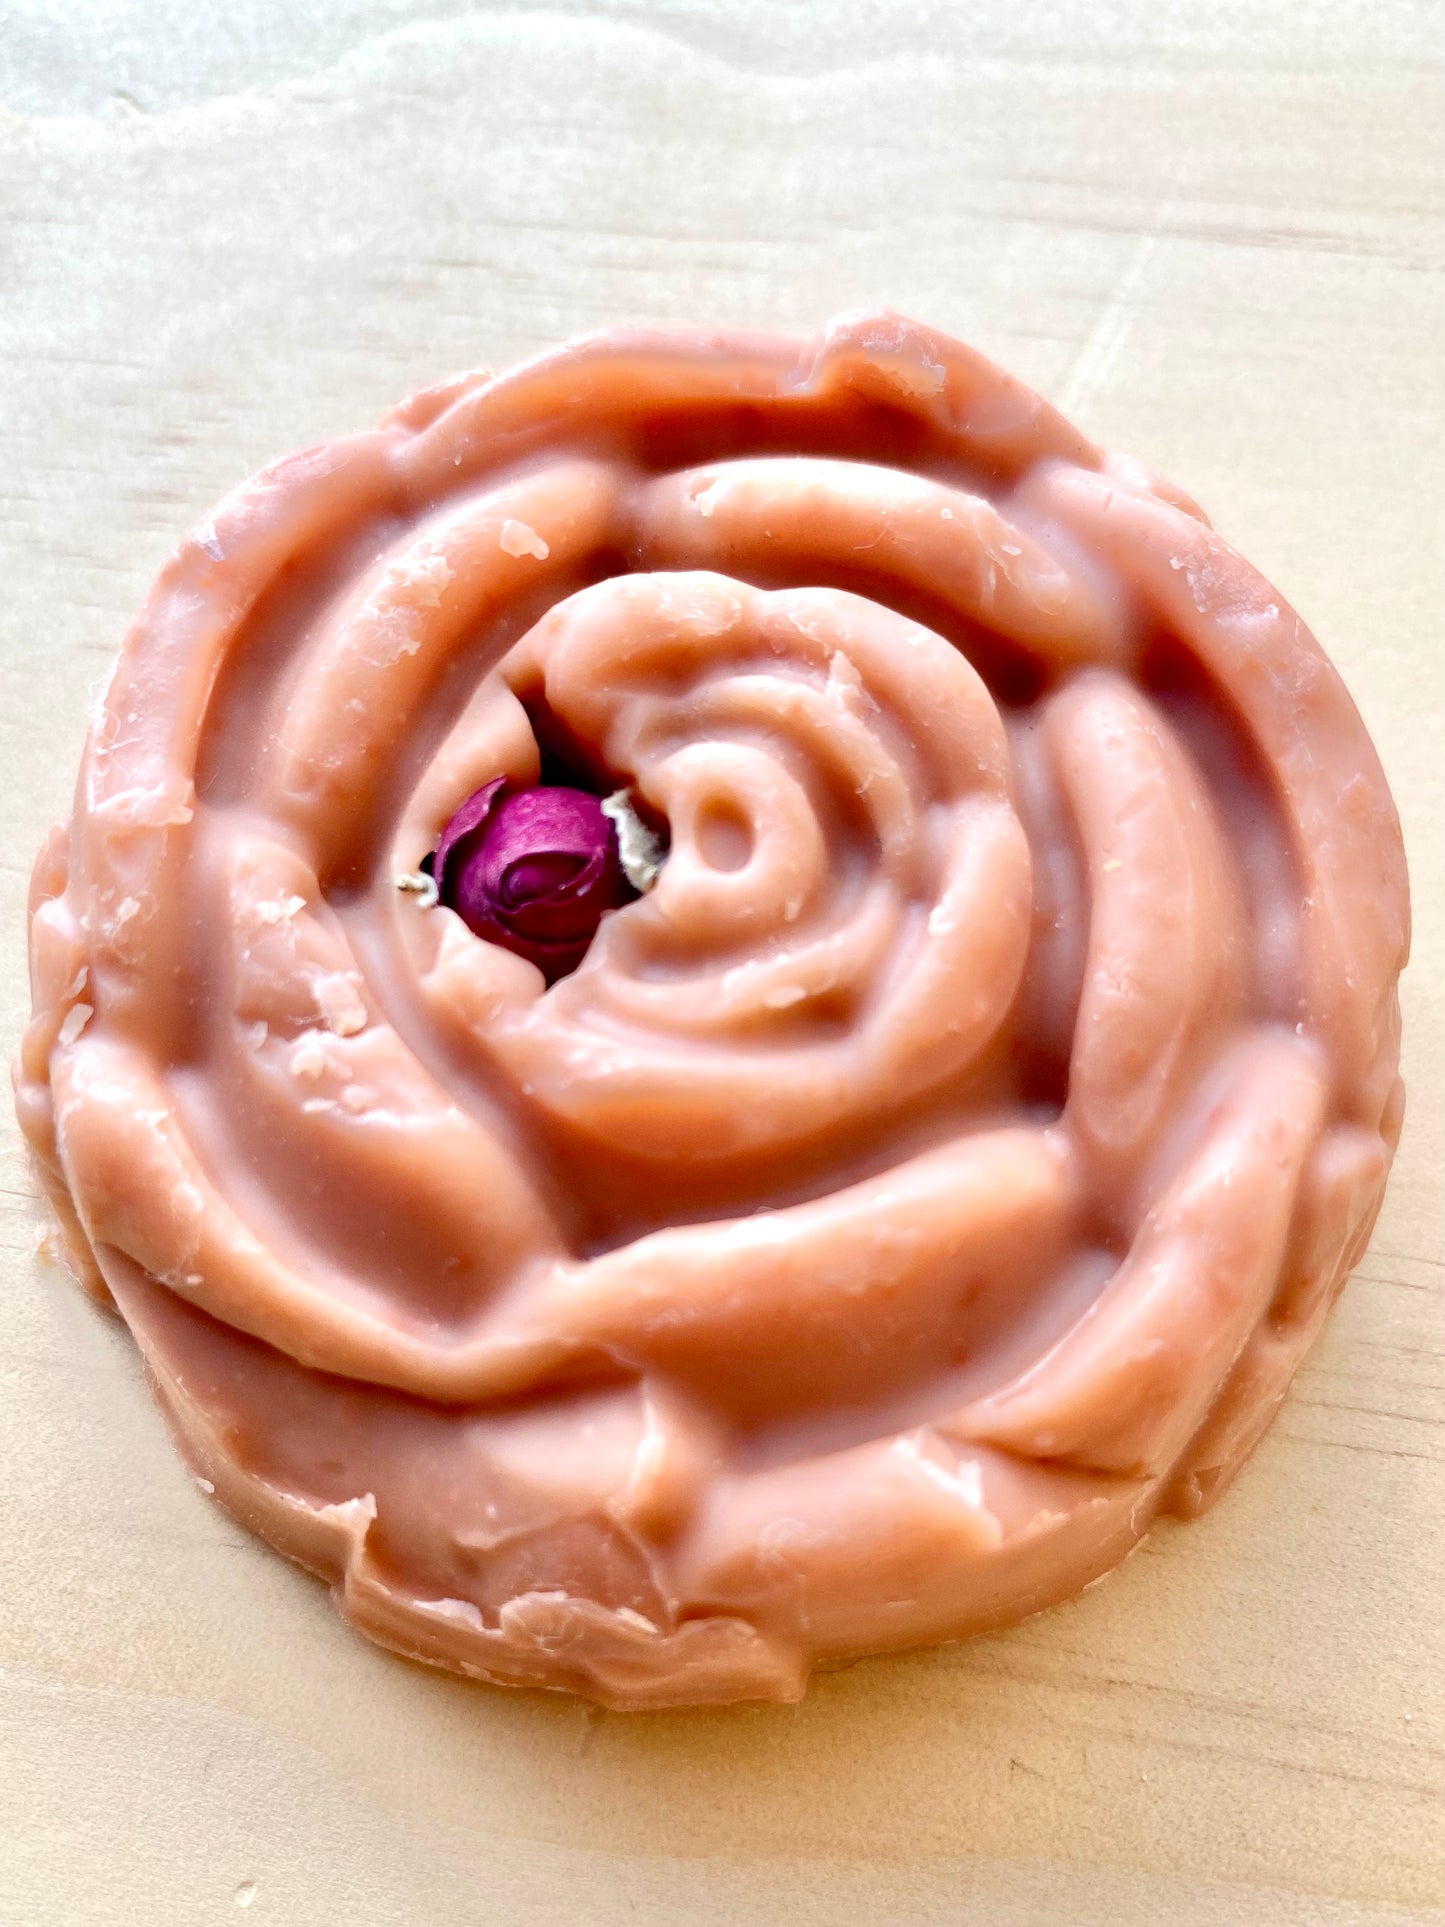 Face Soap - Moroccan Rose Flower for Dry, Mature, or Normal Skin - 2.5oz